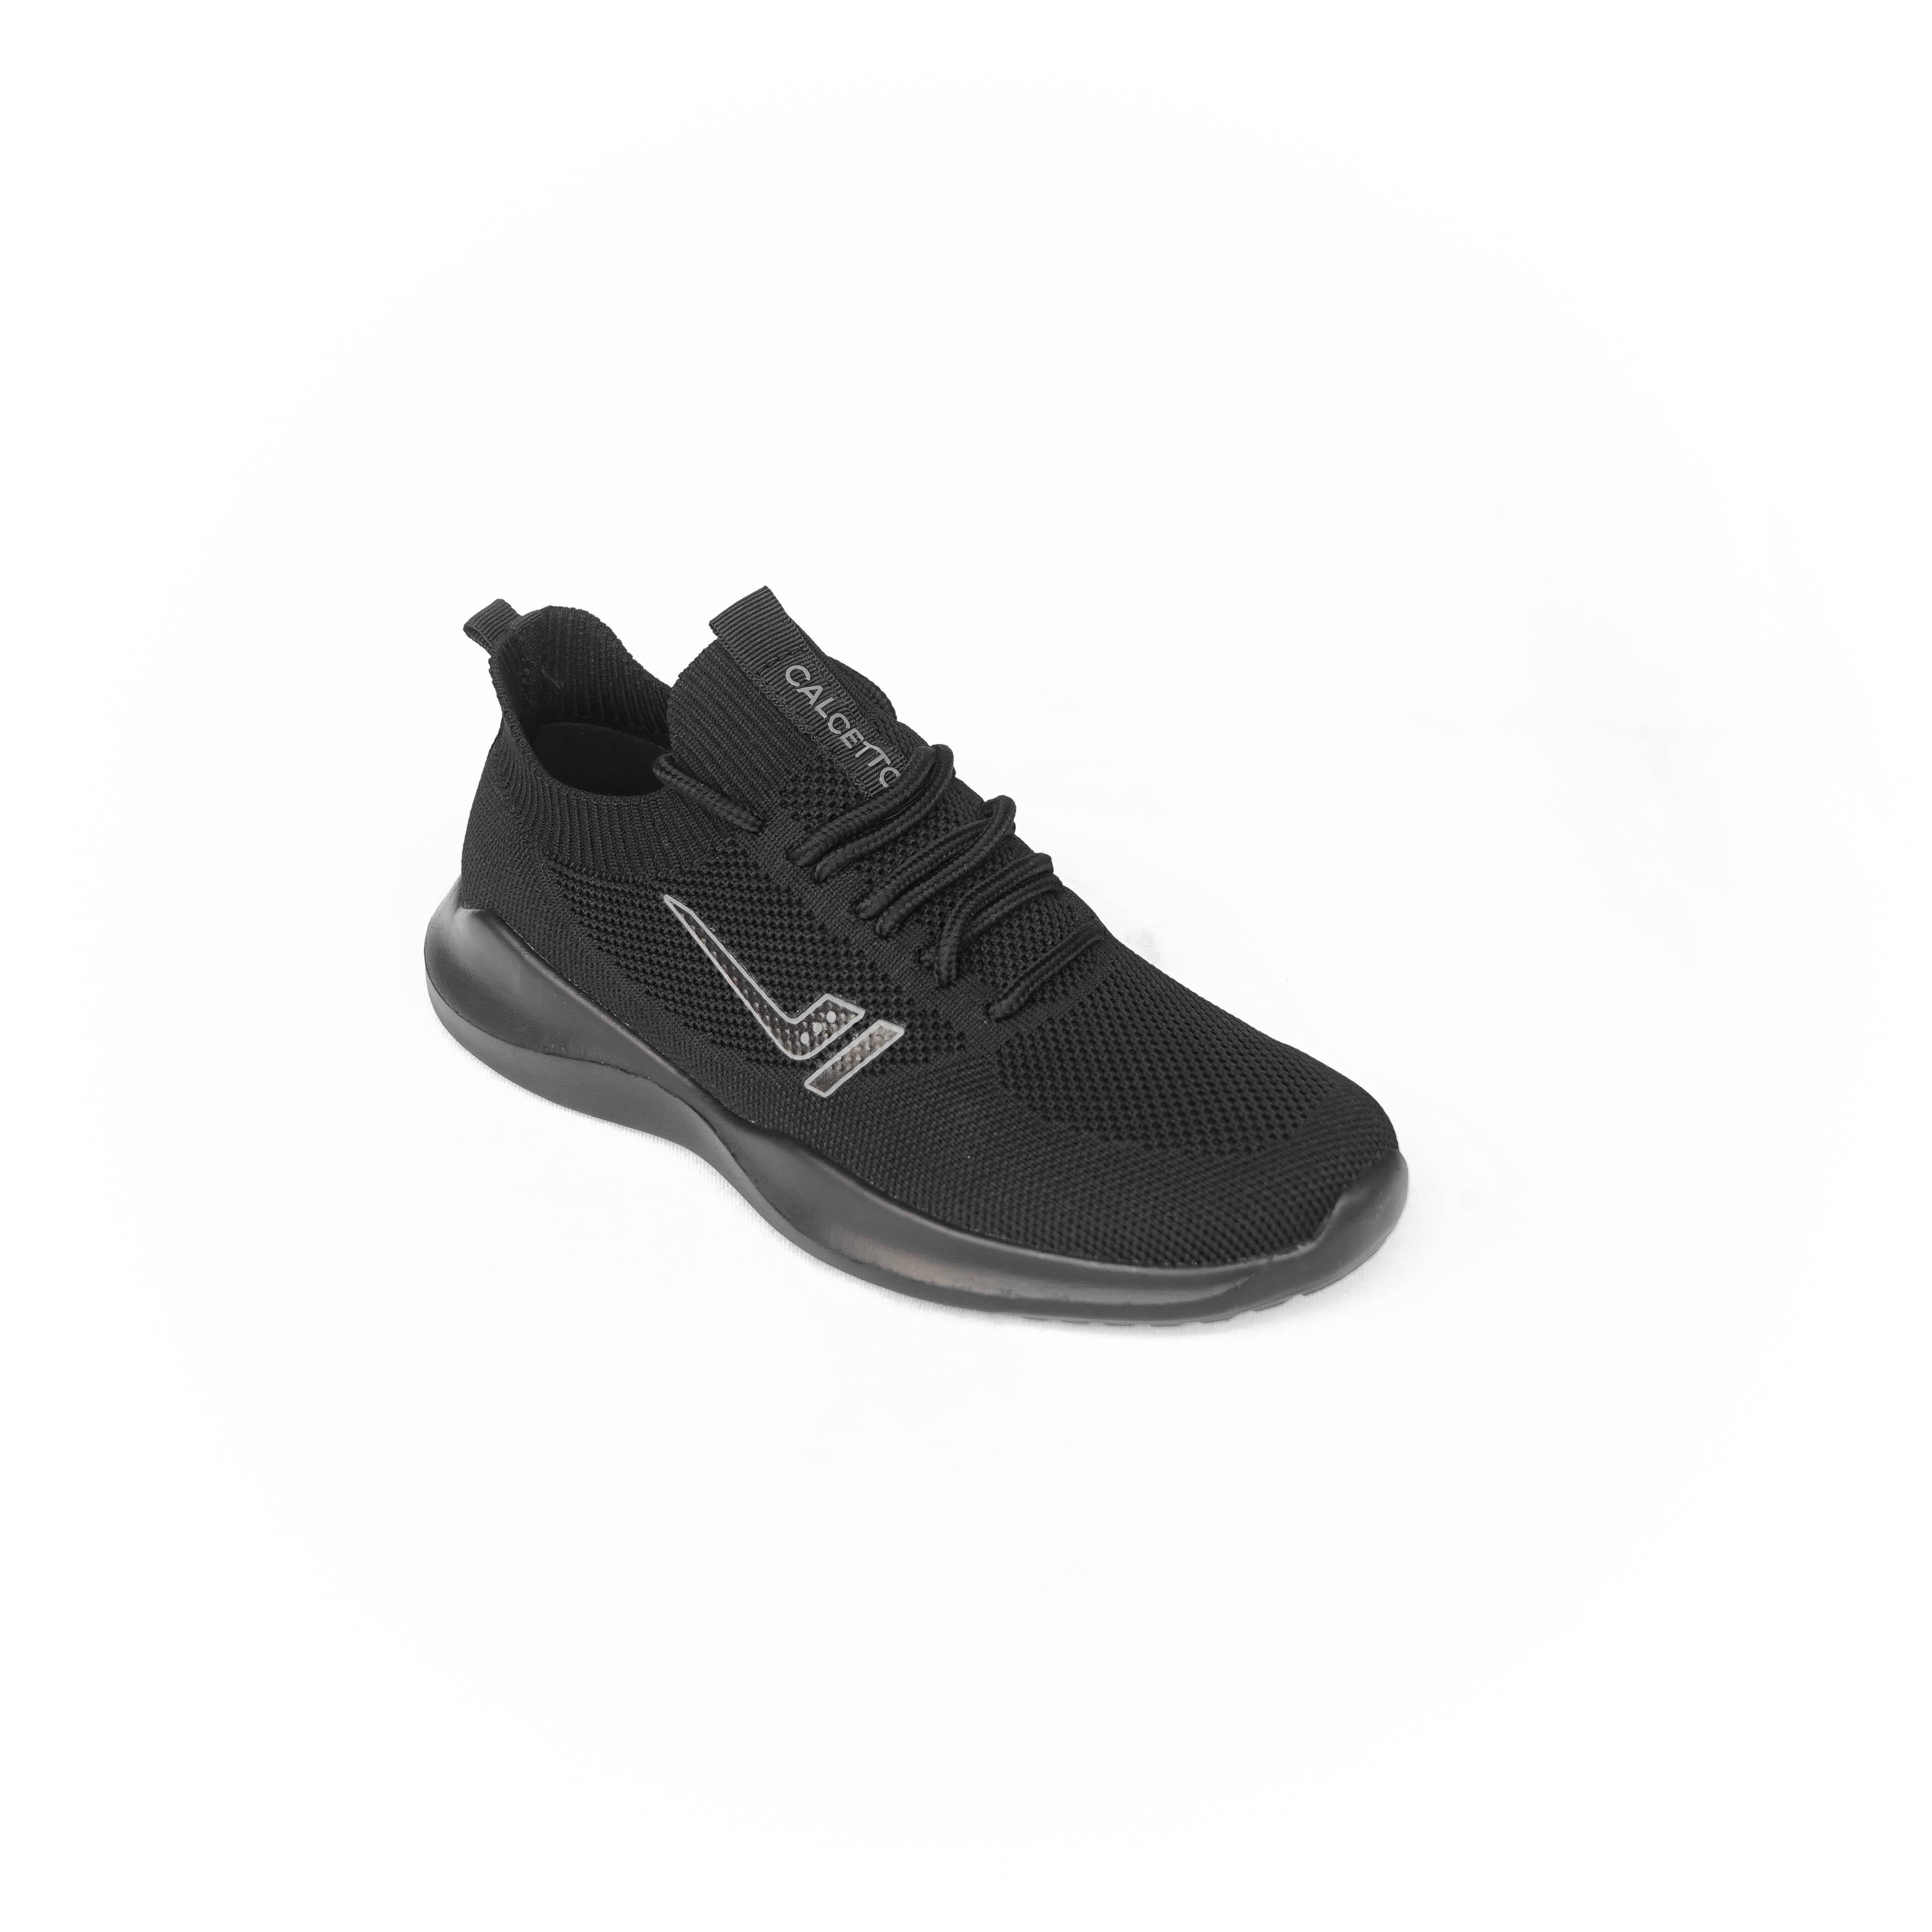 Calcetto Brand Women's Laced Sport Shoes CLT-9818 (Full Black) :: RAJASHOES